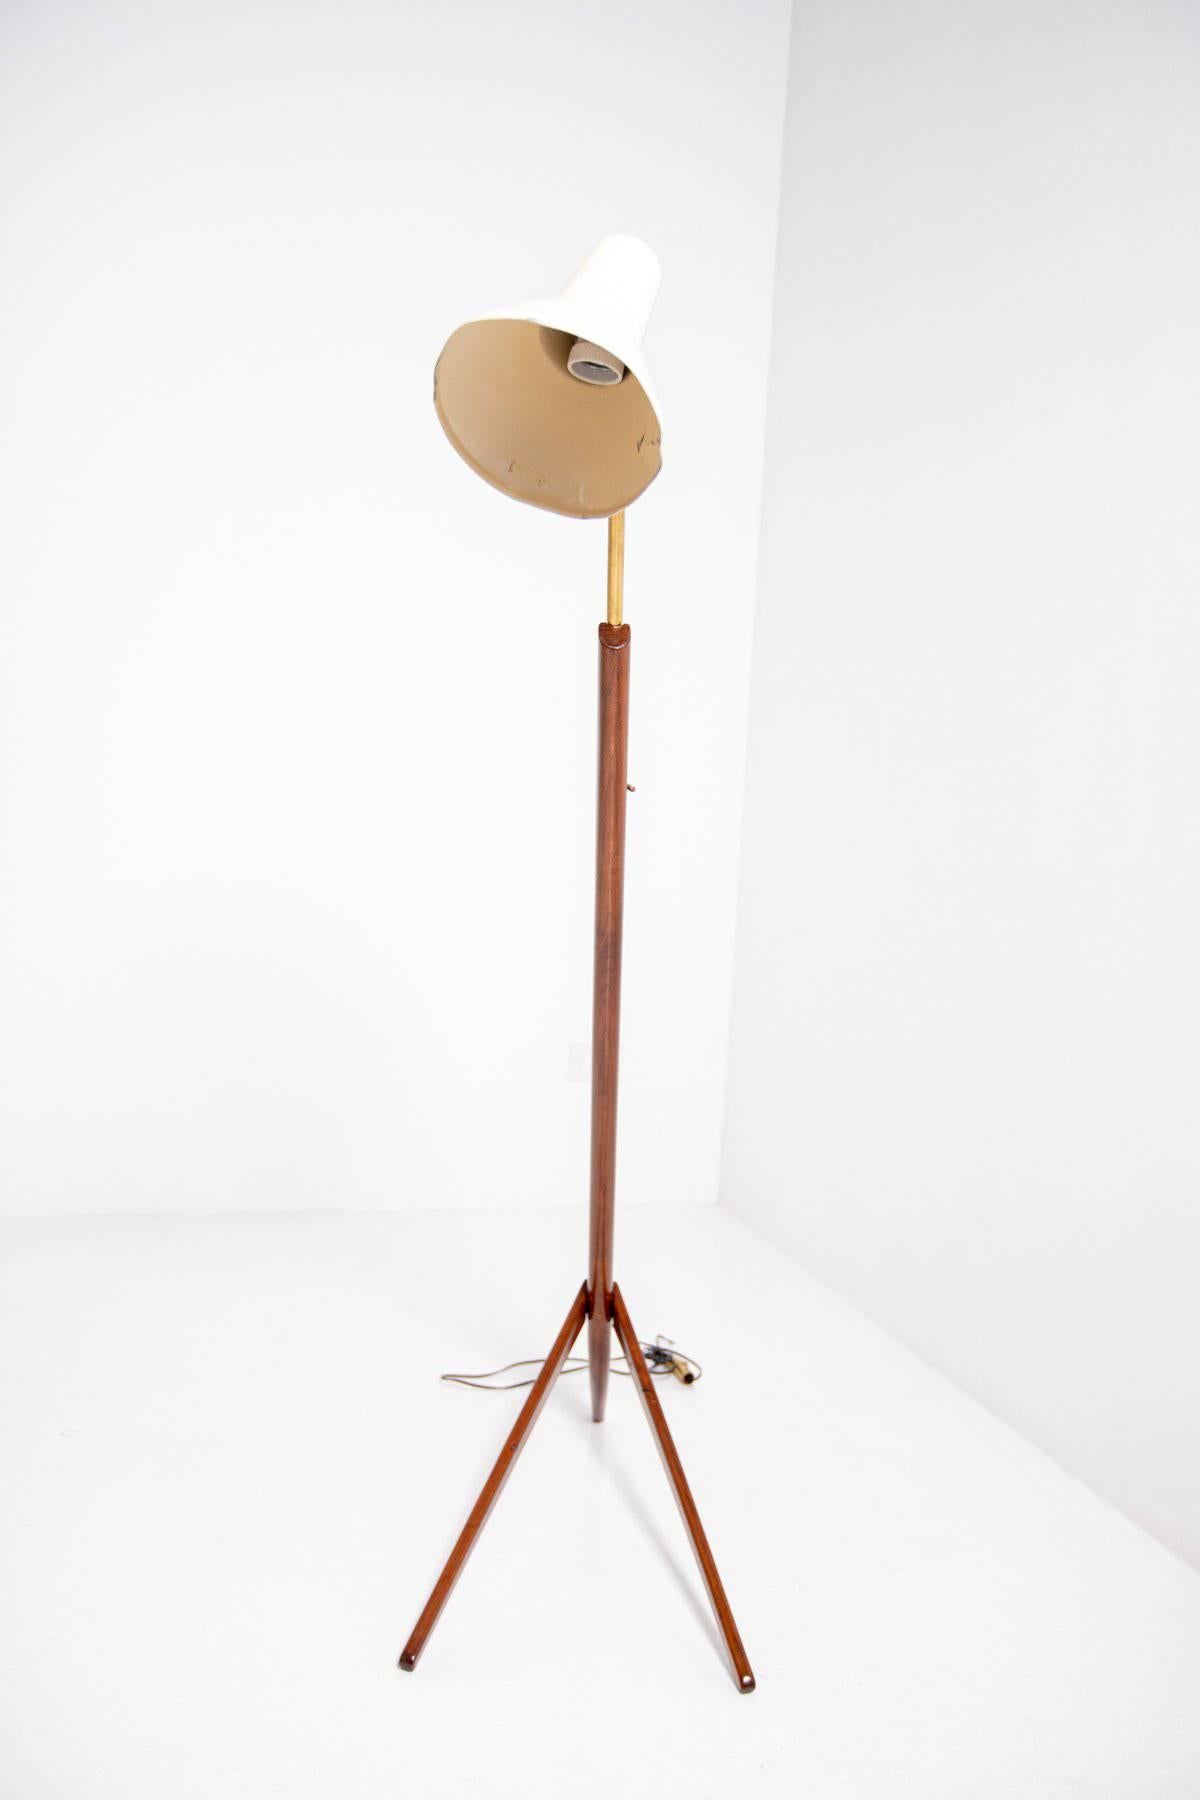 Aluminum Vintage Floor Lamp Attributed to Franco Albini, 1950s For Sale